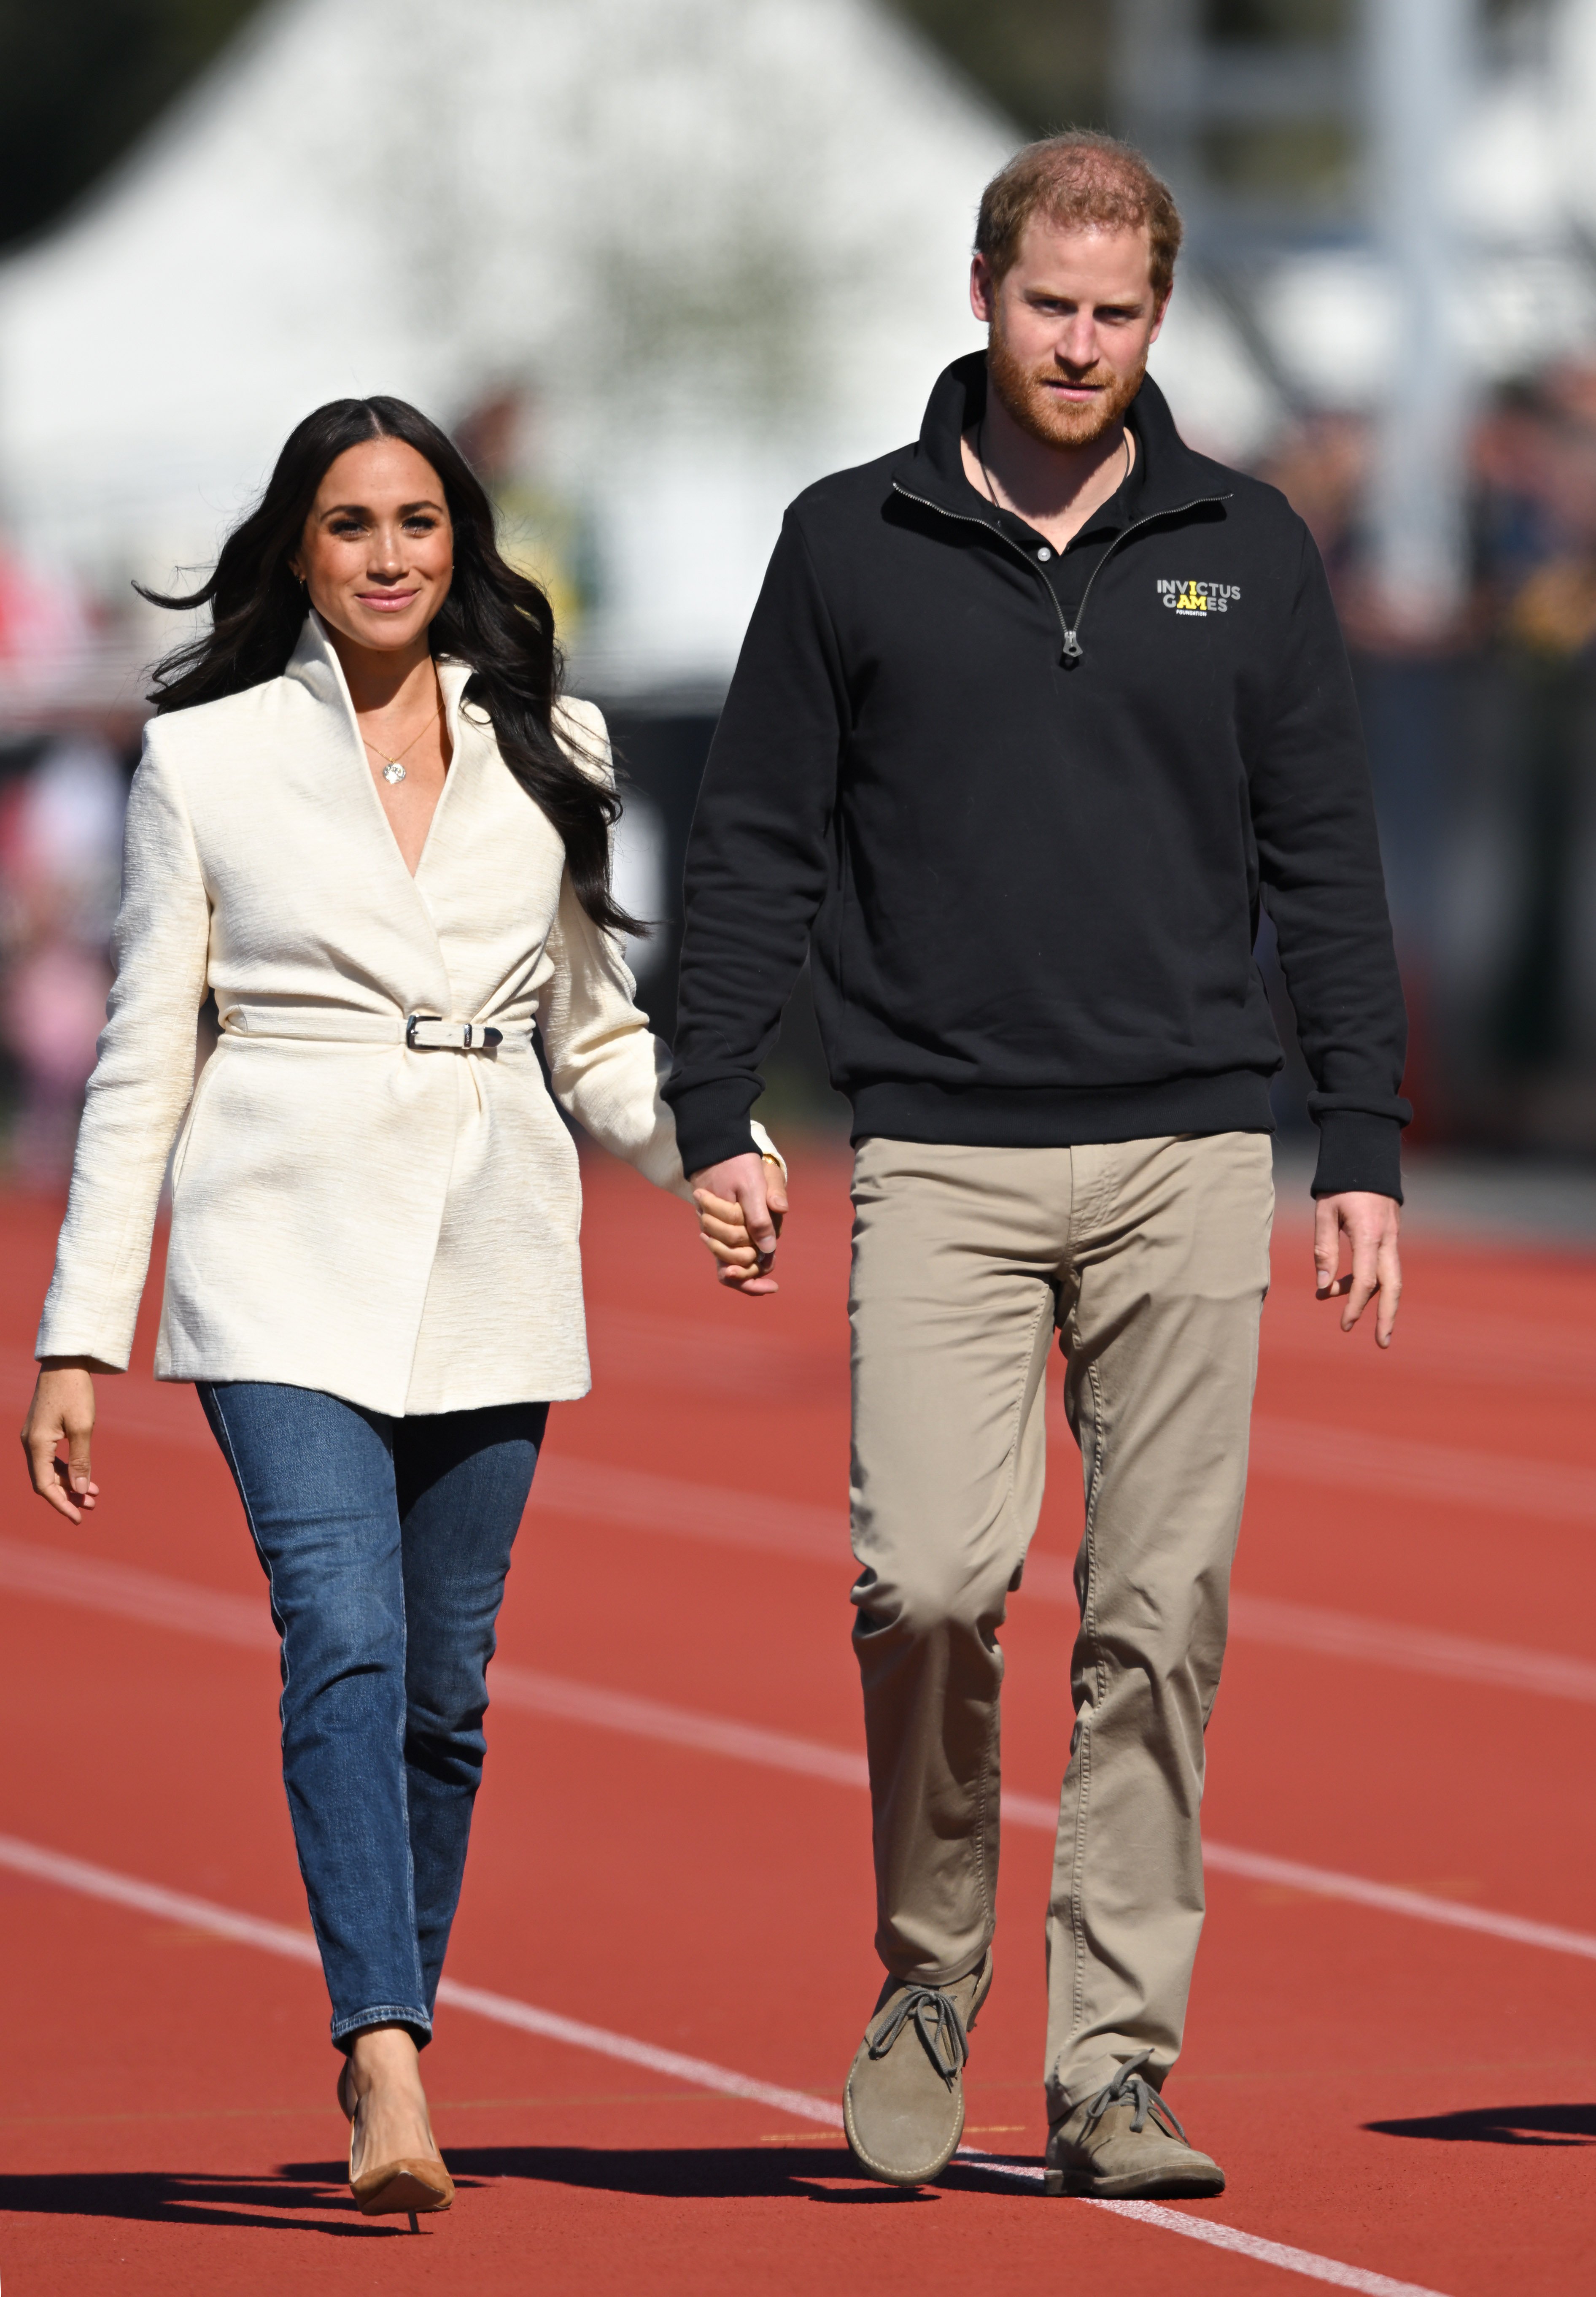 Prince Harry, Duke of Sussex, and Meghan, Duchess of Sussex, attend the athletics event during the Invictus Games at Zuiderpark on April 17, 2022, in The Hague, Netherlands. | Source: Getty Images